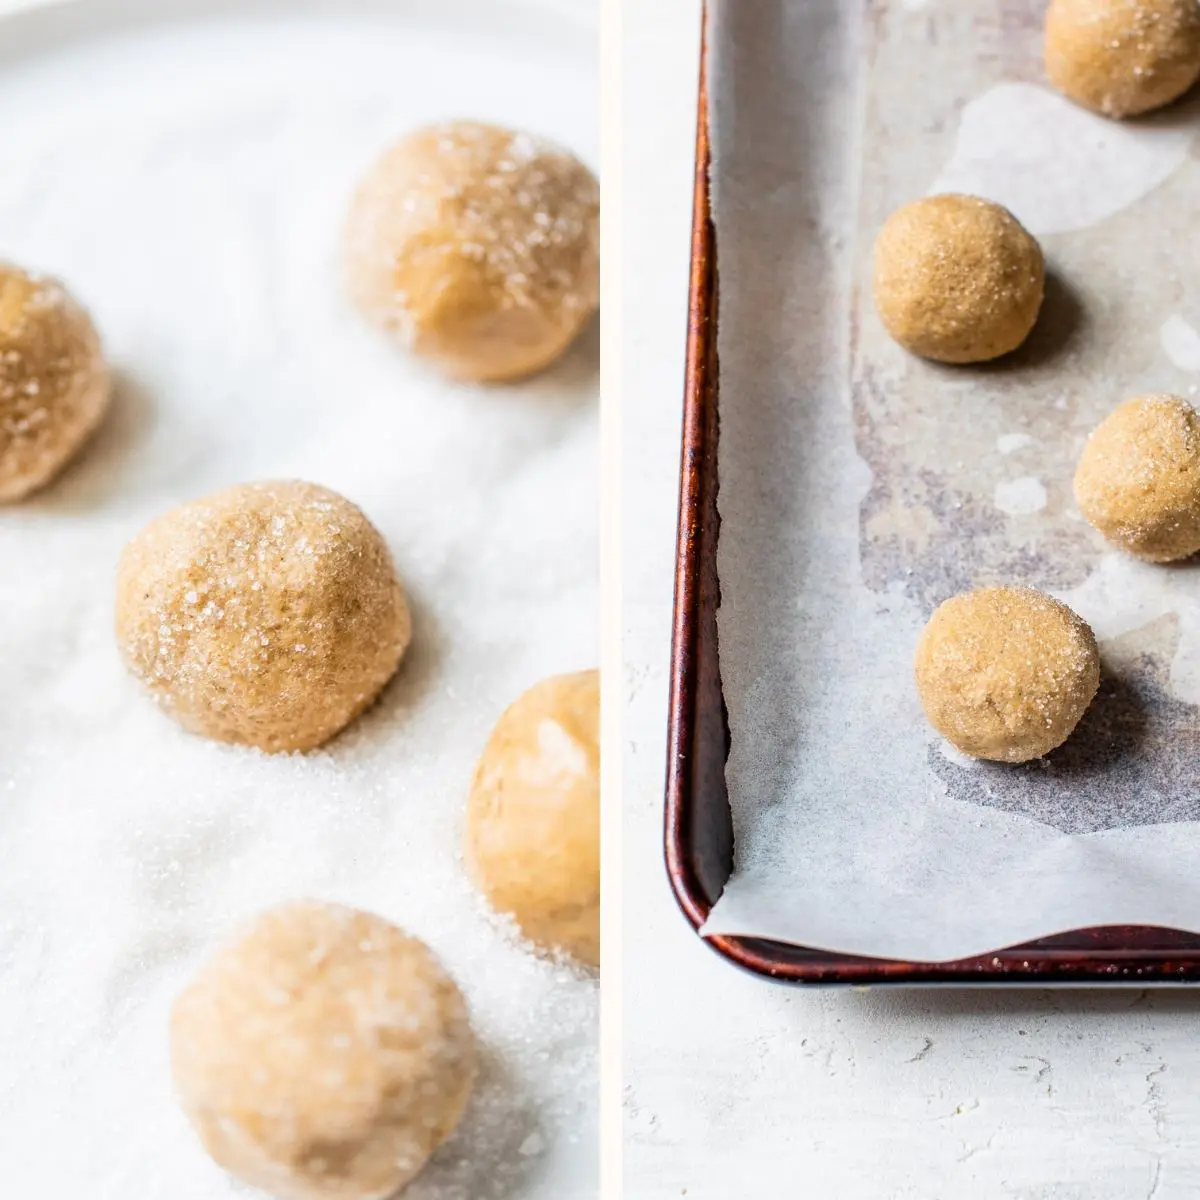 balls of dough covered in sugar on a baking sheet